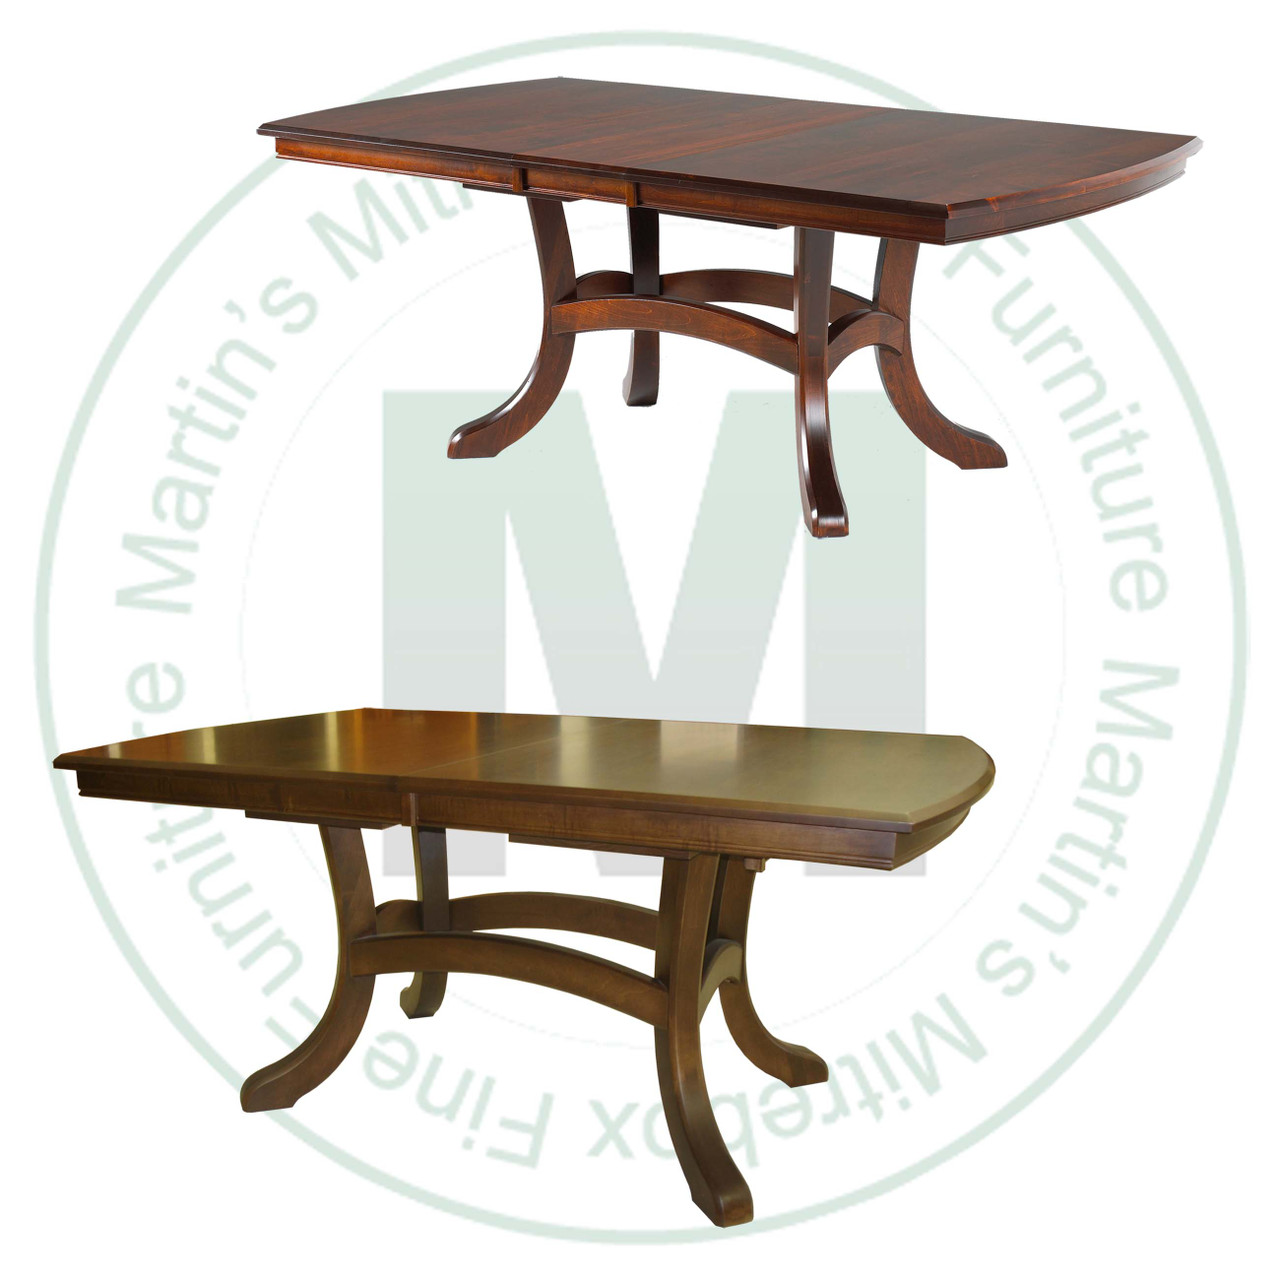 Oak Jordan Double Pedestal Table 42''D x 72''W x 30''H With 2 - 12'' Leaves. Table Has 1.25'' Thick Top